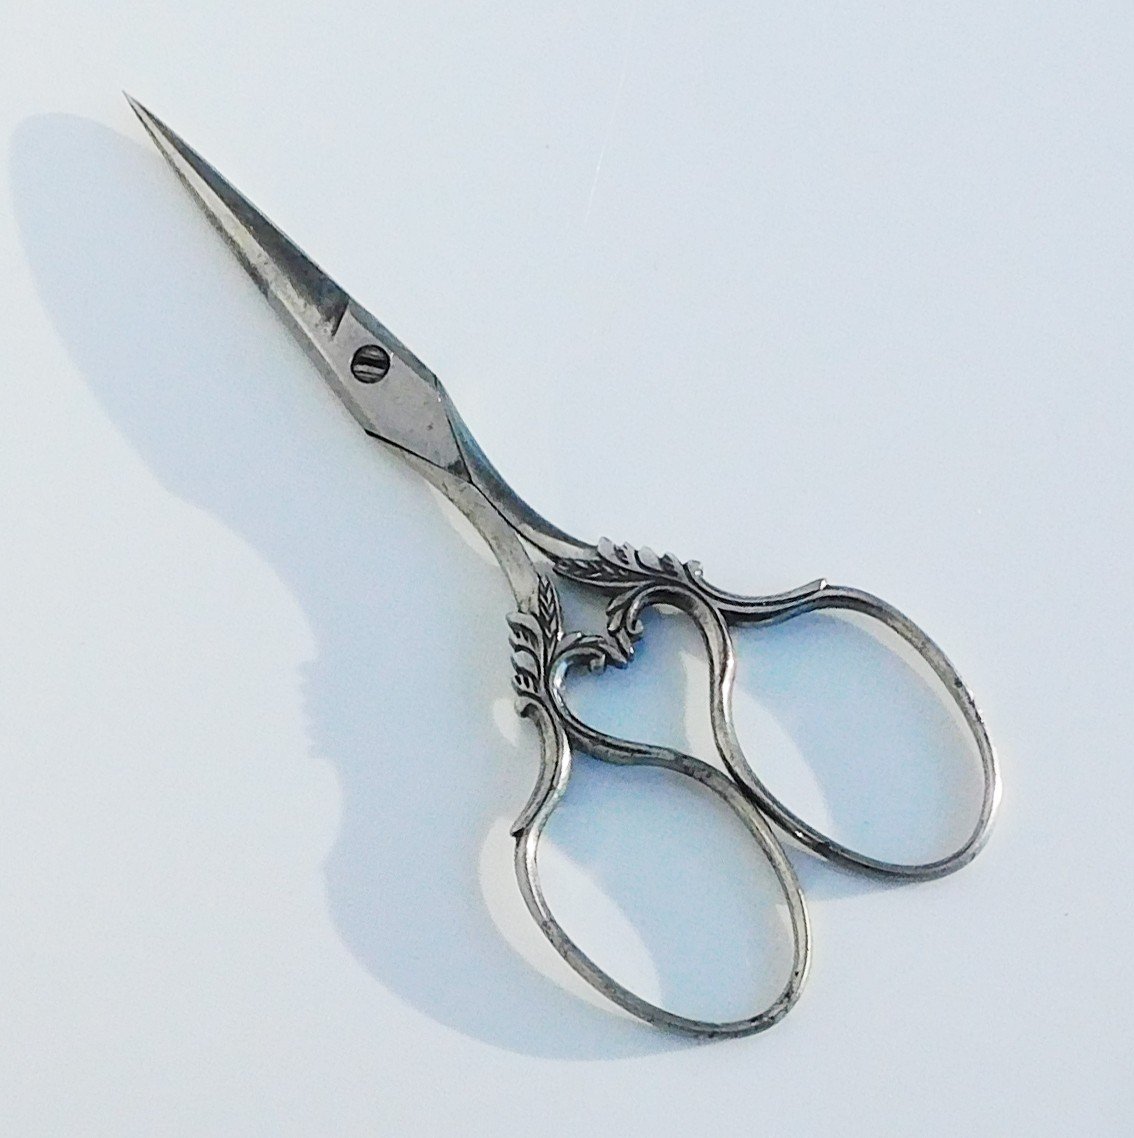 Pair Of Old Embroidery Steel Scissors Sewing Necessary Late 19th Century Early 20th Century-photo-3